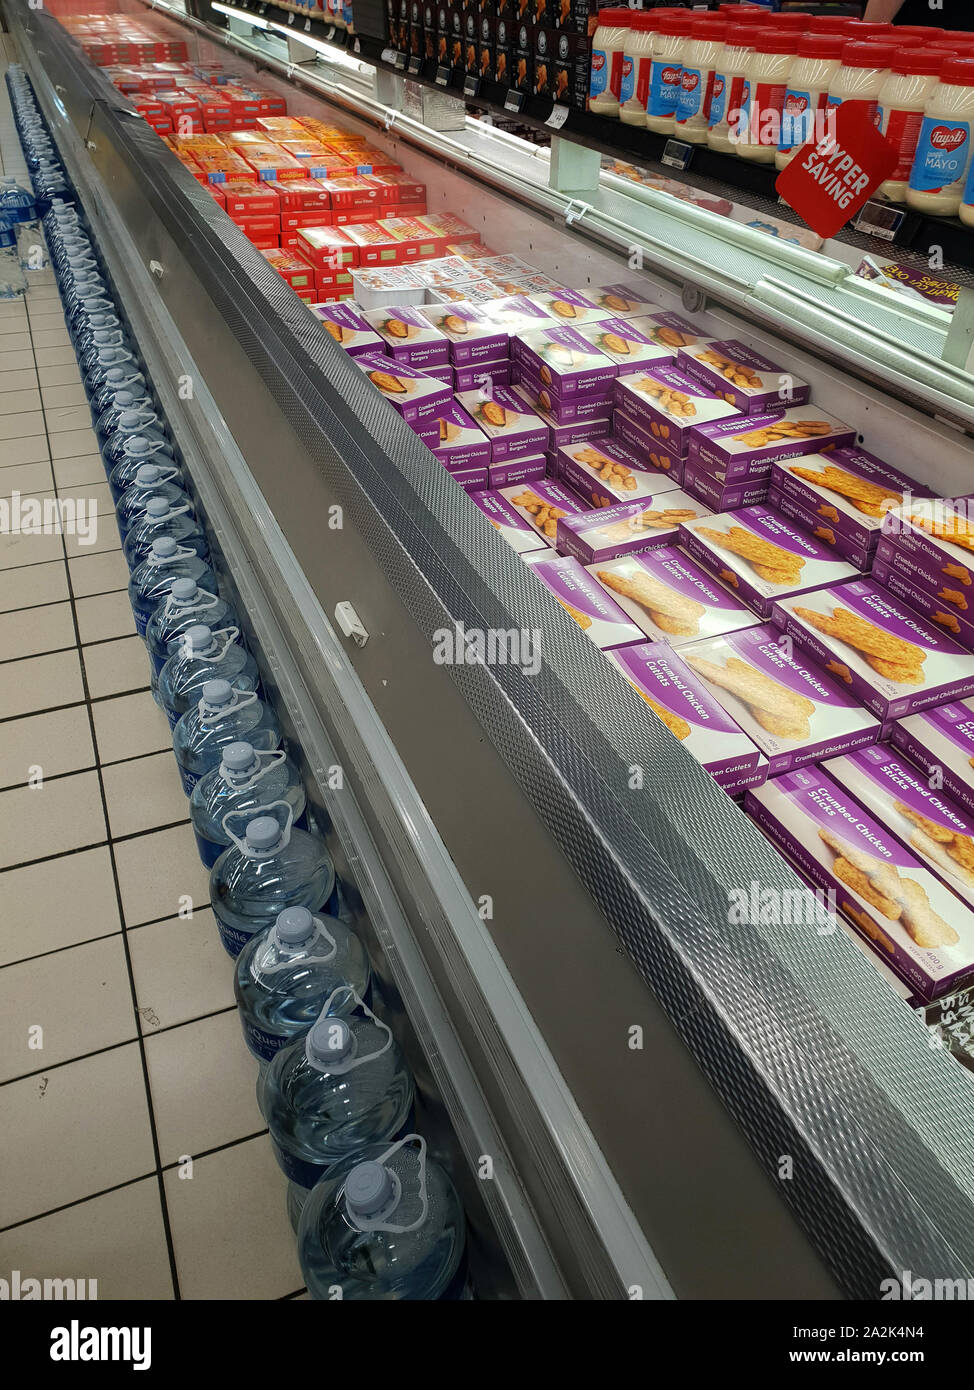 Frozen foods aisle in a Pick n Pay supermarket, South Africa Stock Photo